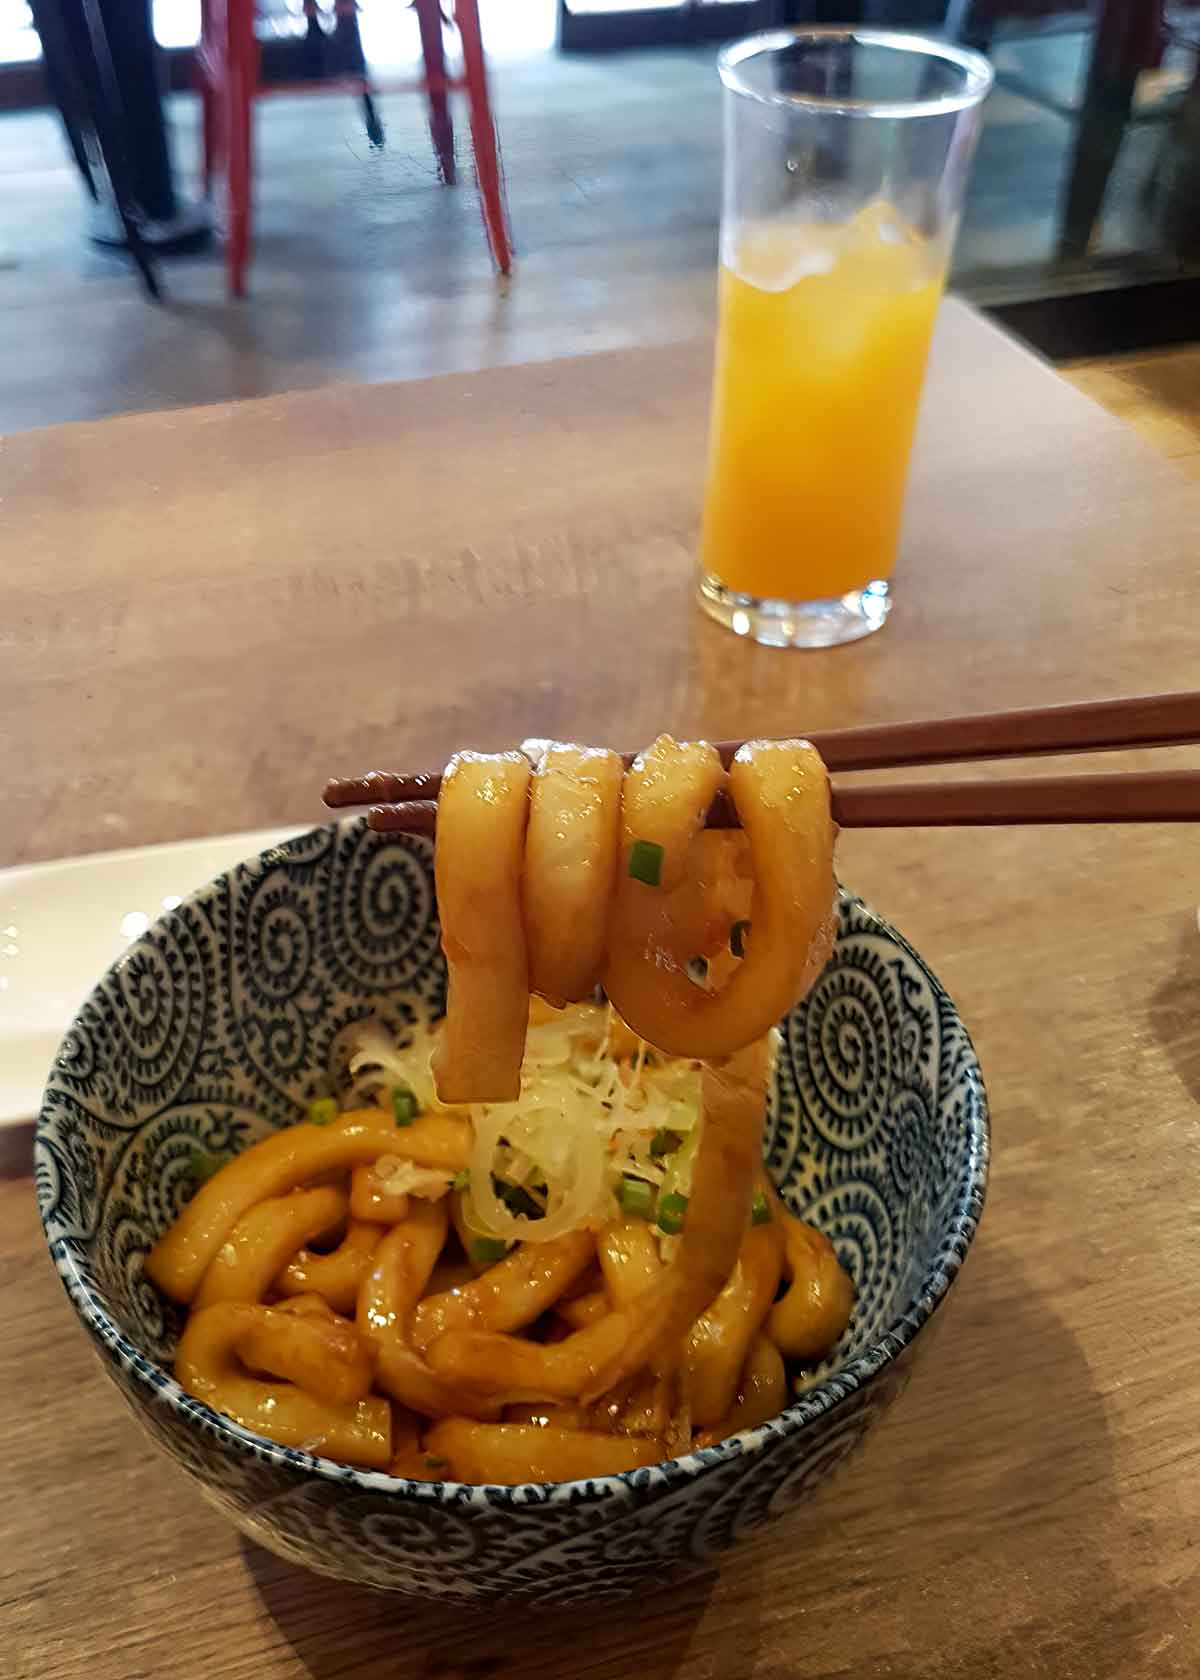 Chubby handmade udon noodles